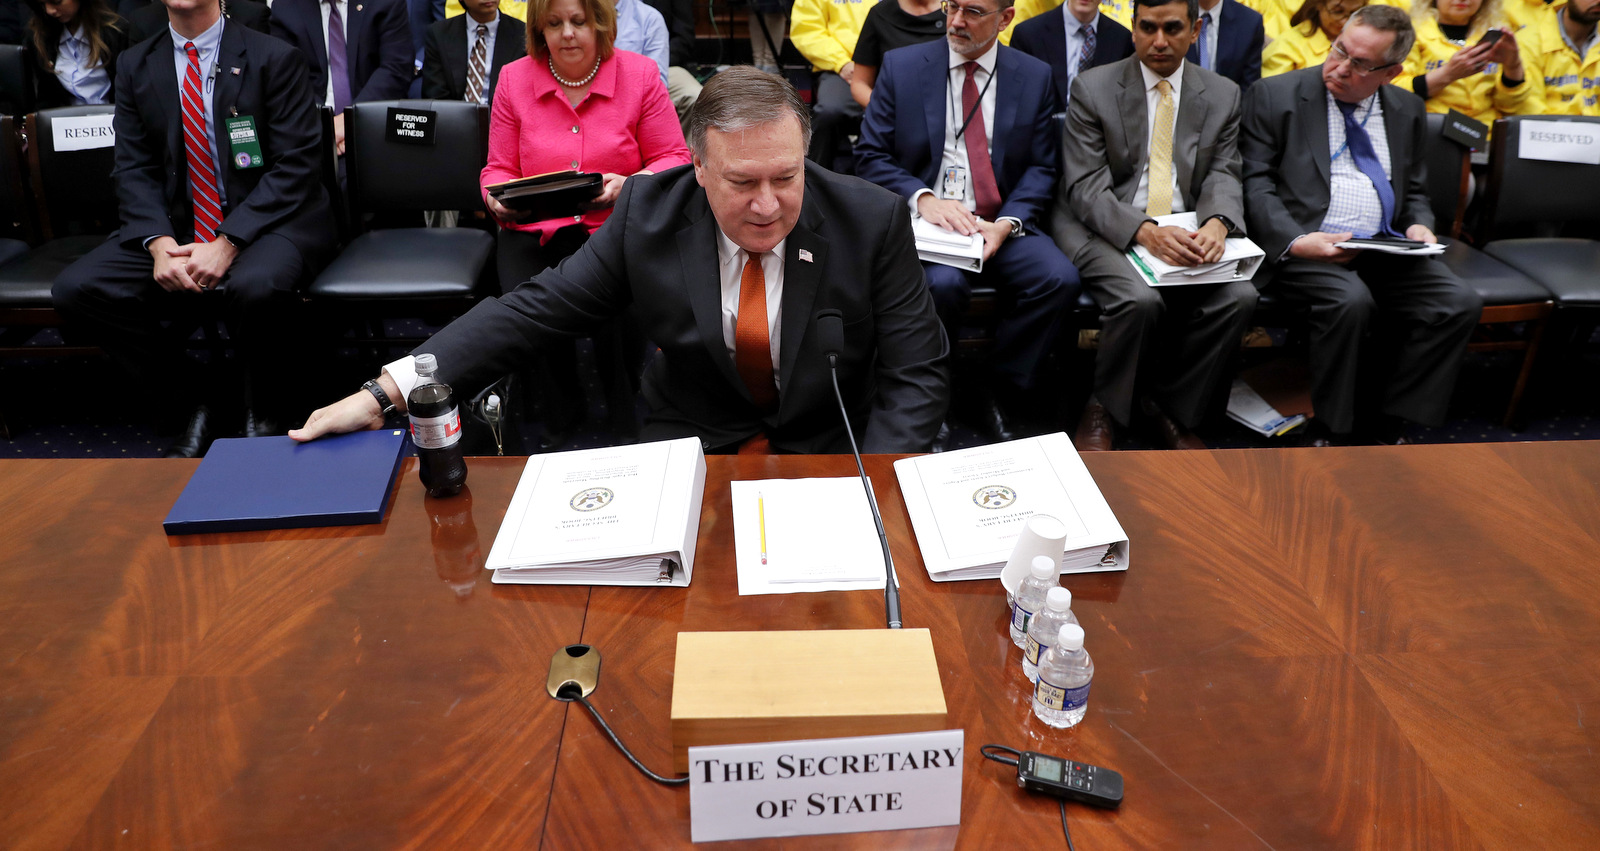 Secretary of State Mike Pompeo takes his seat as he prepares to testify at the House Foreign Affairs Committee hearing on Capitol Hill in Washington, Wednesday, May 23, 2018. (AP Photo/Pablo Martinez Monsivais)